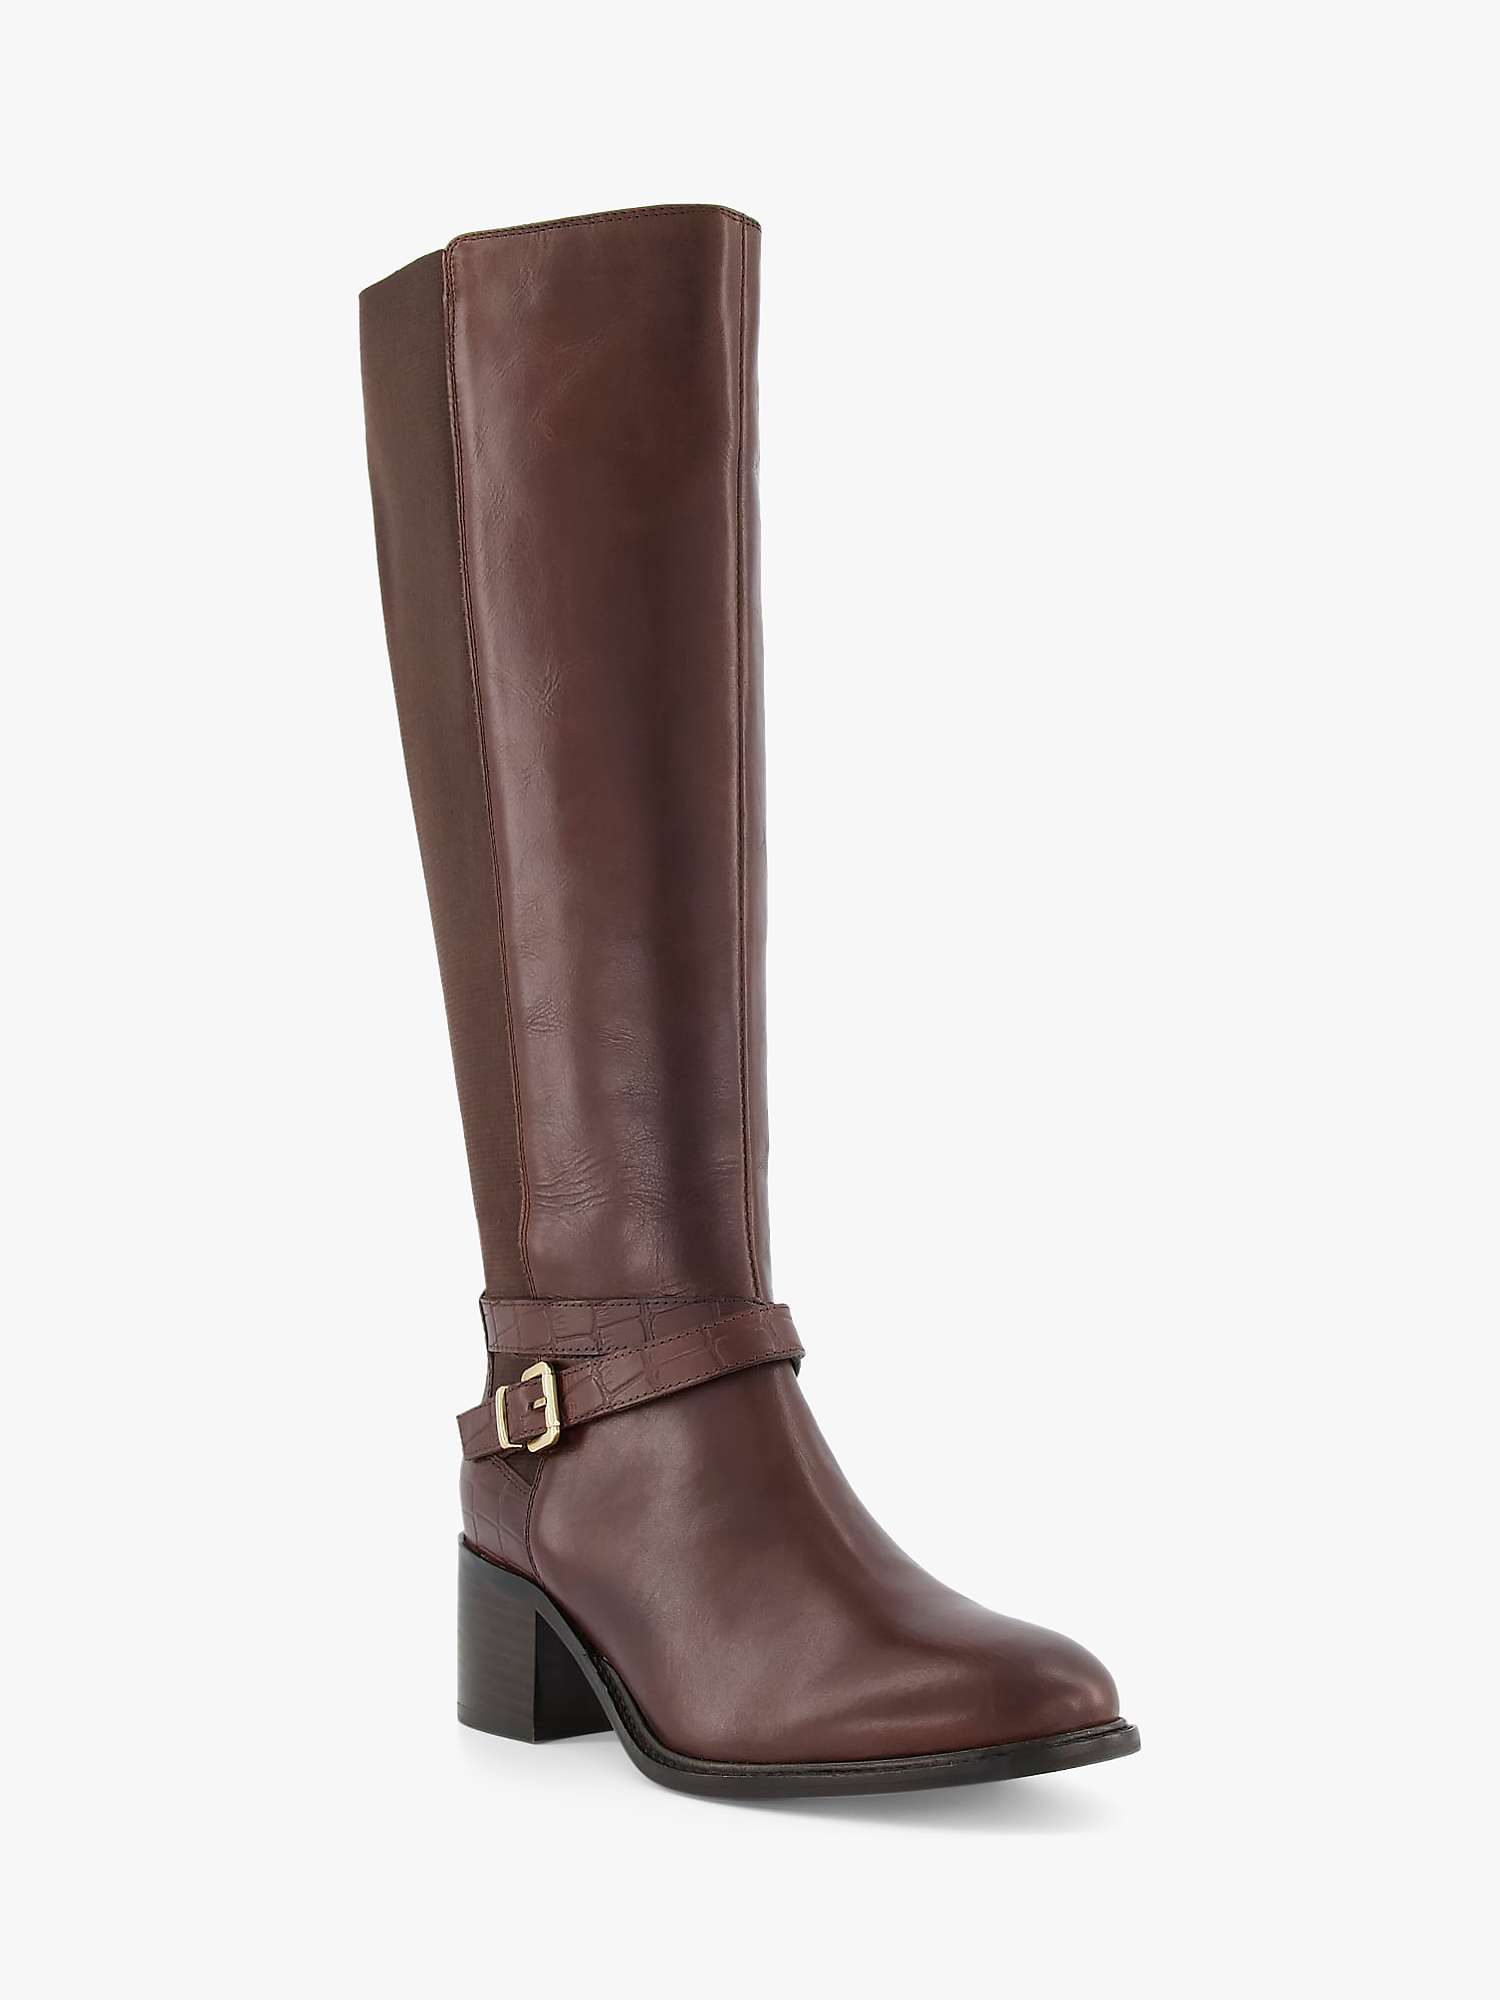 Dune Tildings Leather Buckle Detail Knee High Boots, Brown